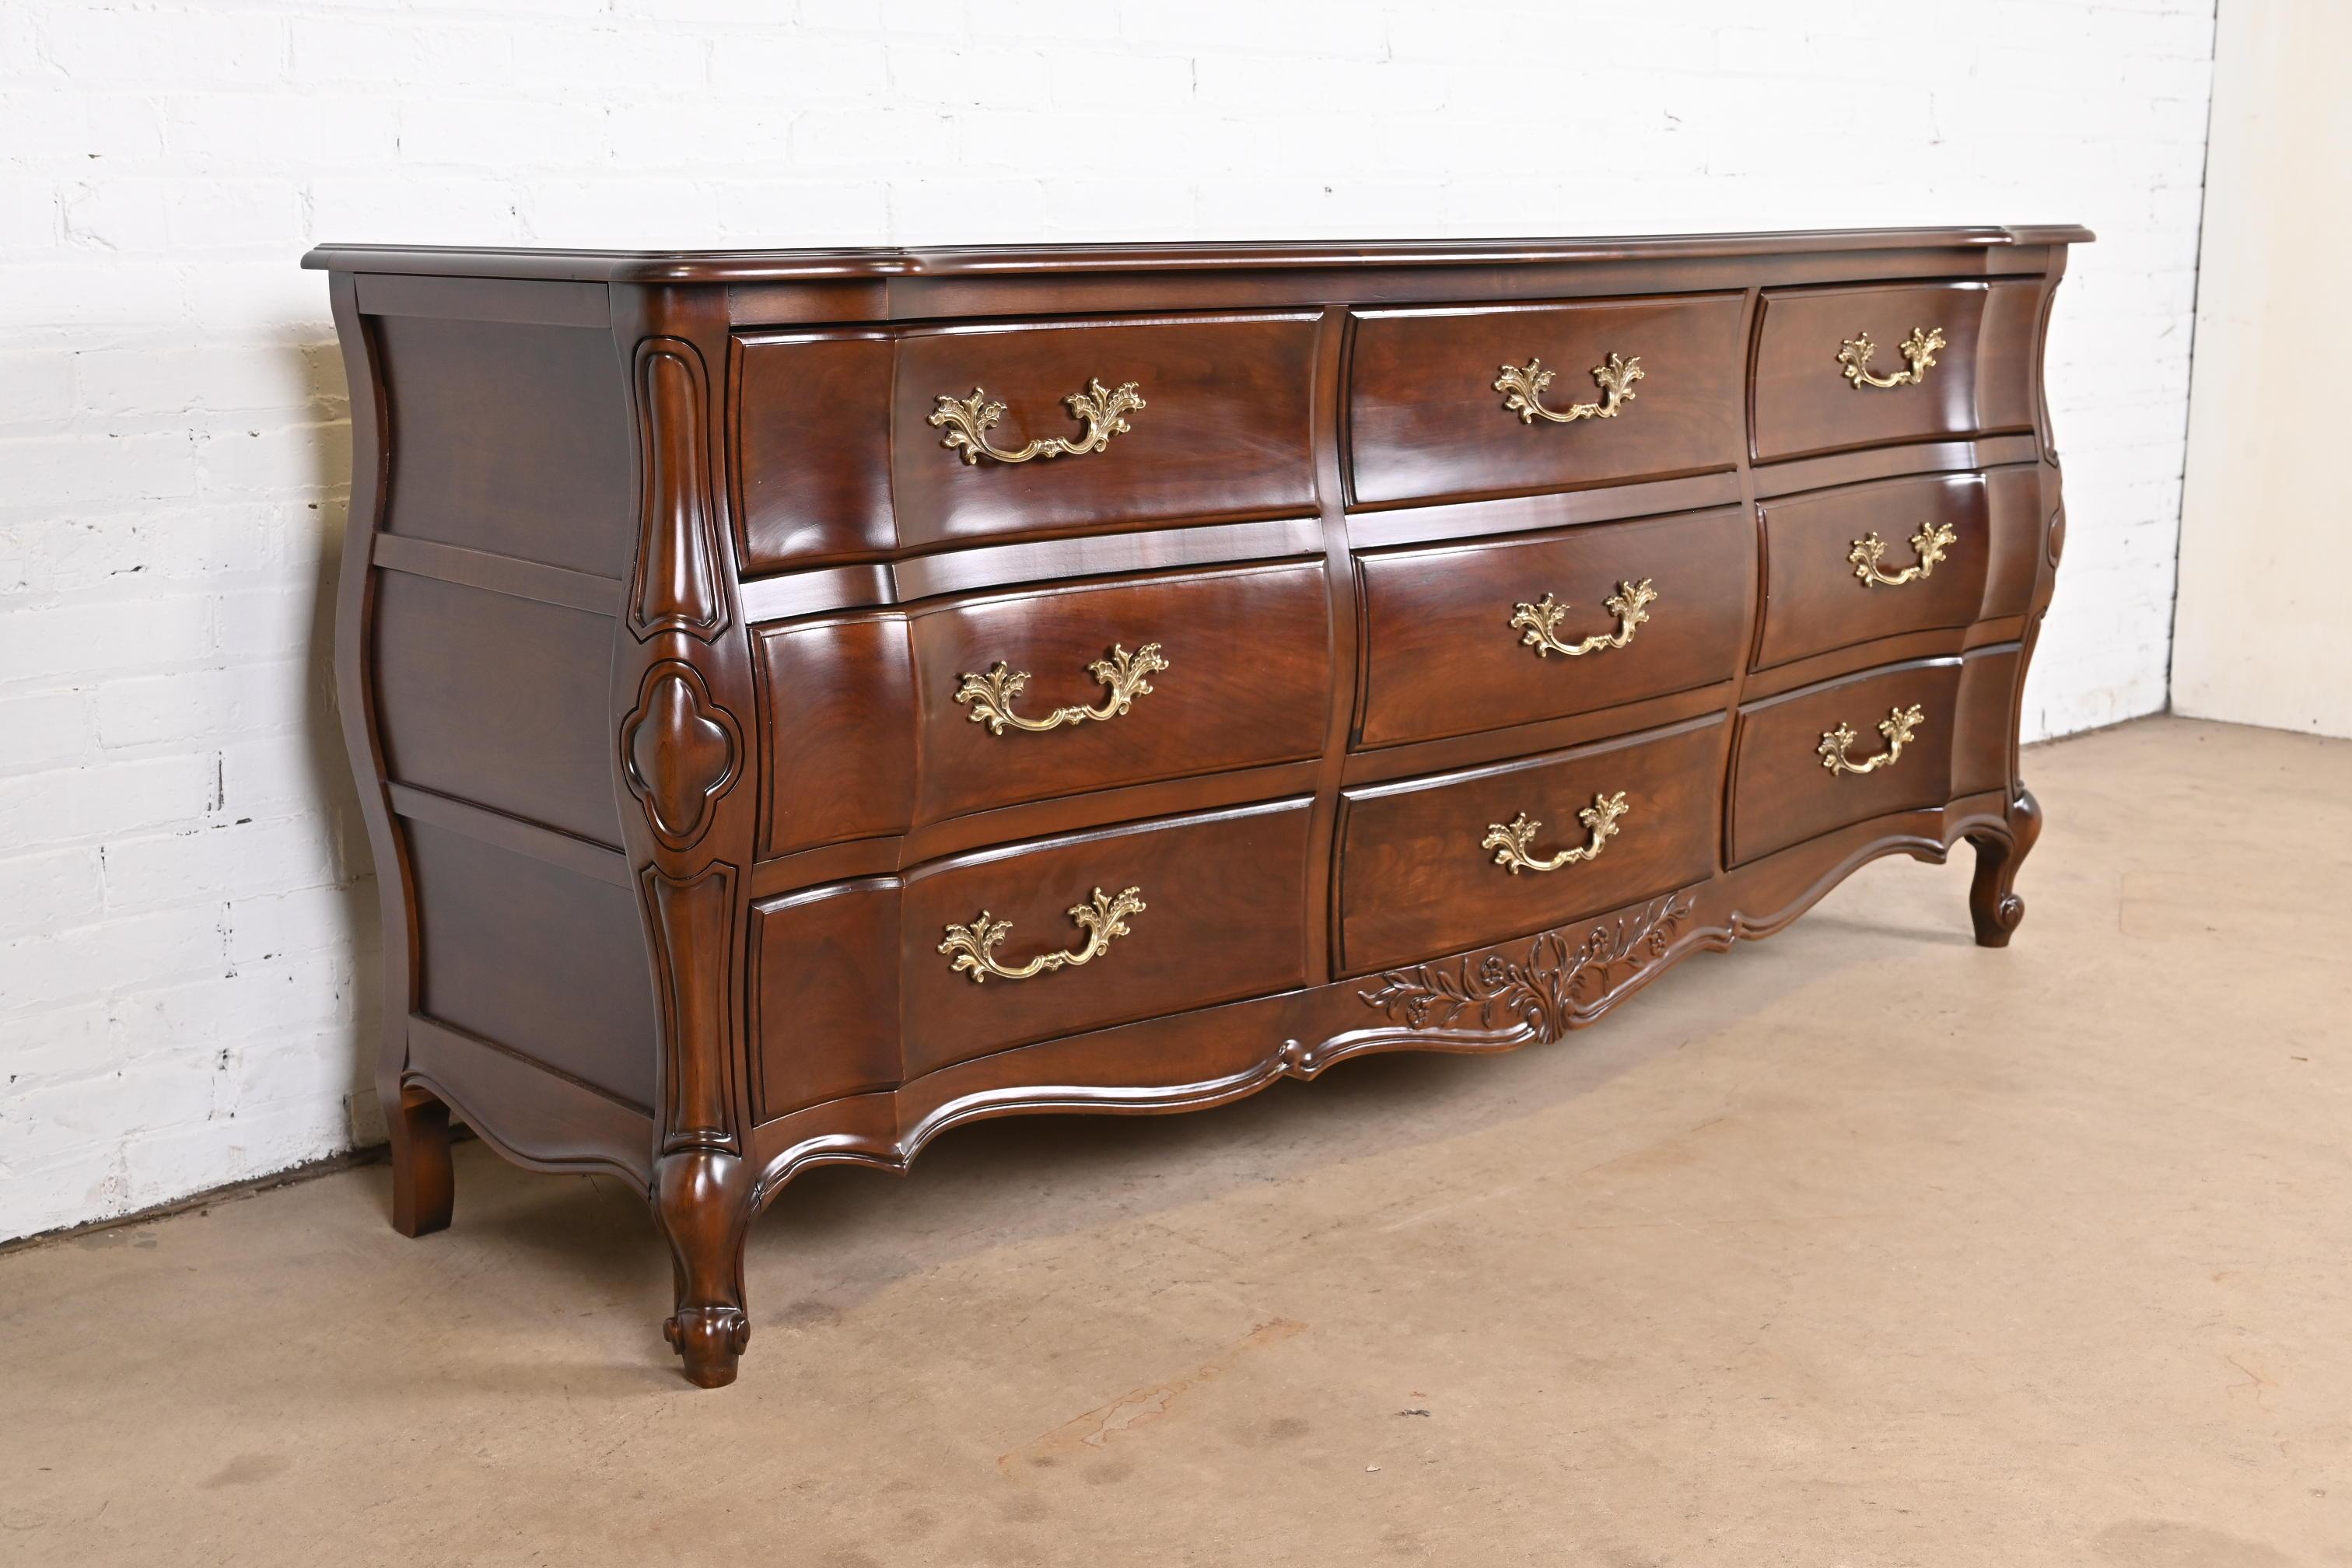 French Provincial Louis XV Cherry Wood Dresser by White Furniture, Refinished In Good Condition For Sale In South Bend, IN